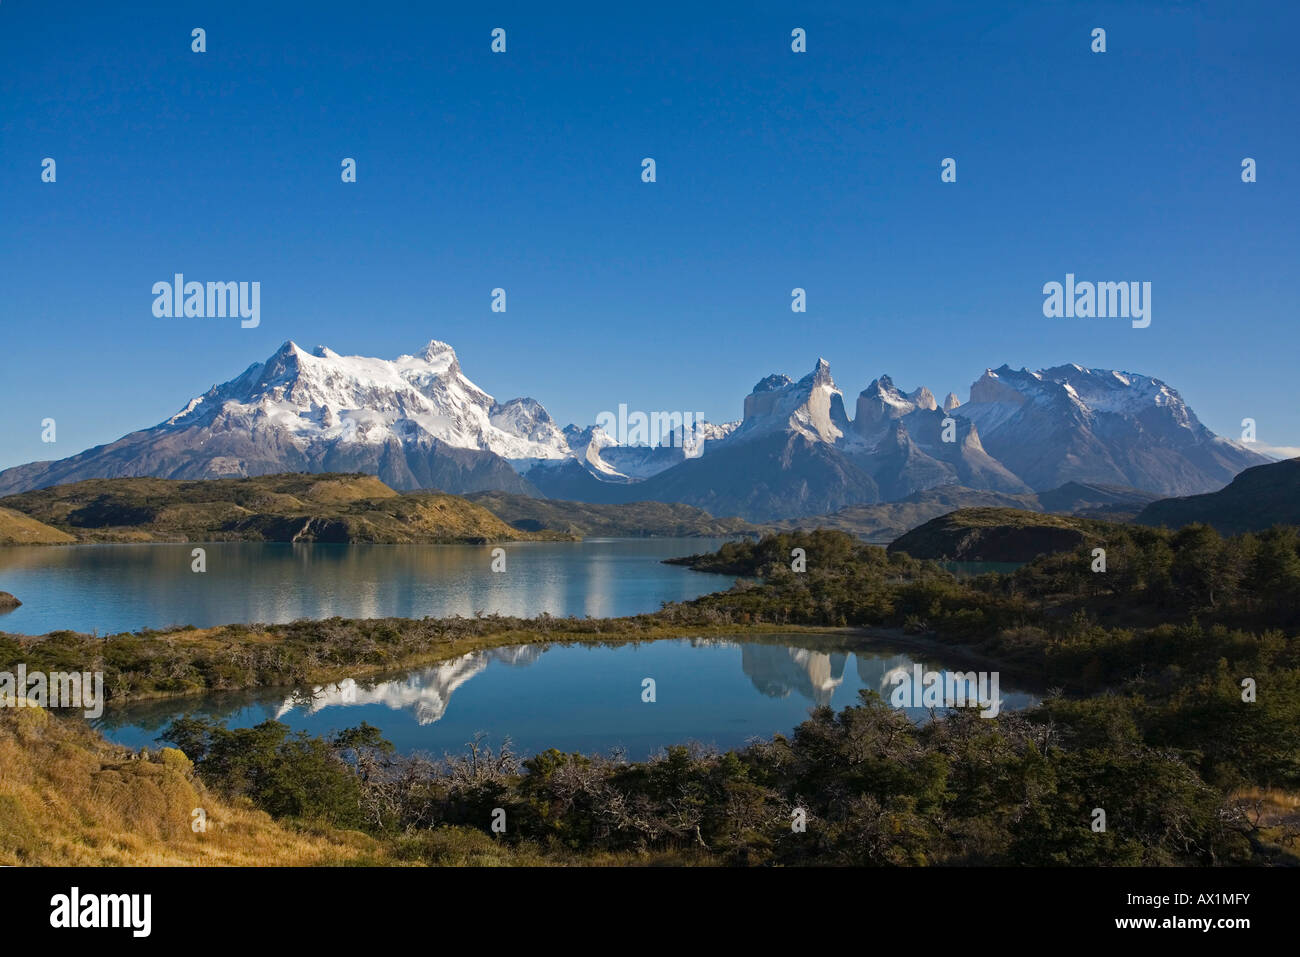 Landscape at the Torres del Paine mountains, National Park Torres del Paine, Patagonia, Chile, South America Stock Photo